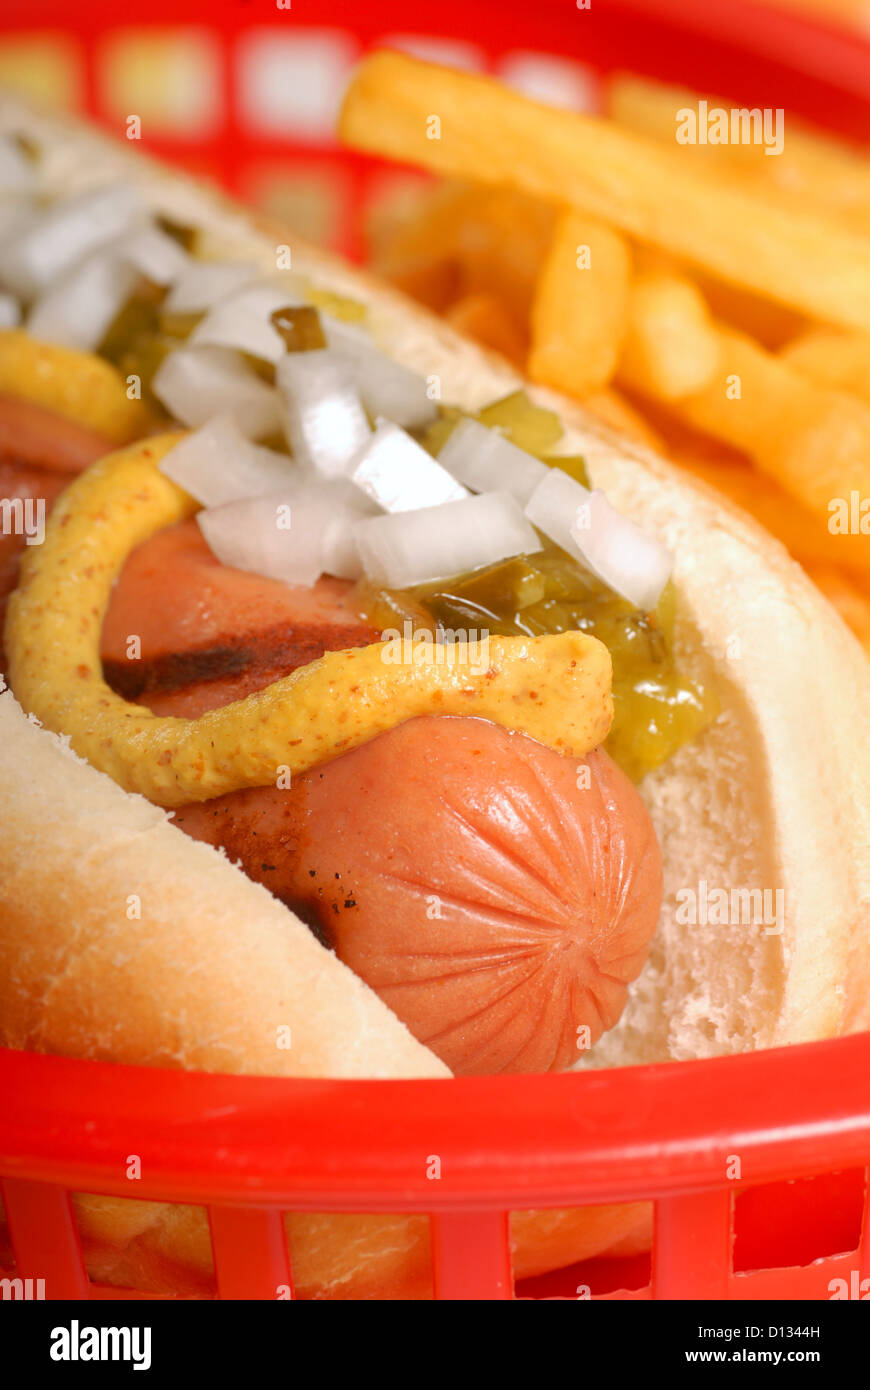 Freshly grilled hot dog and french fries with condiments Stock Photo